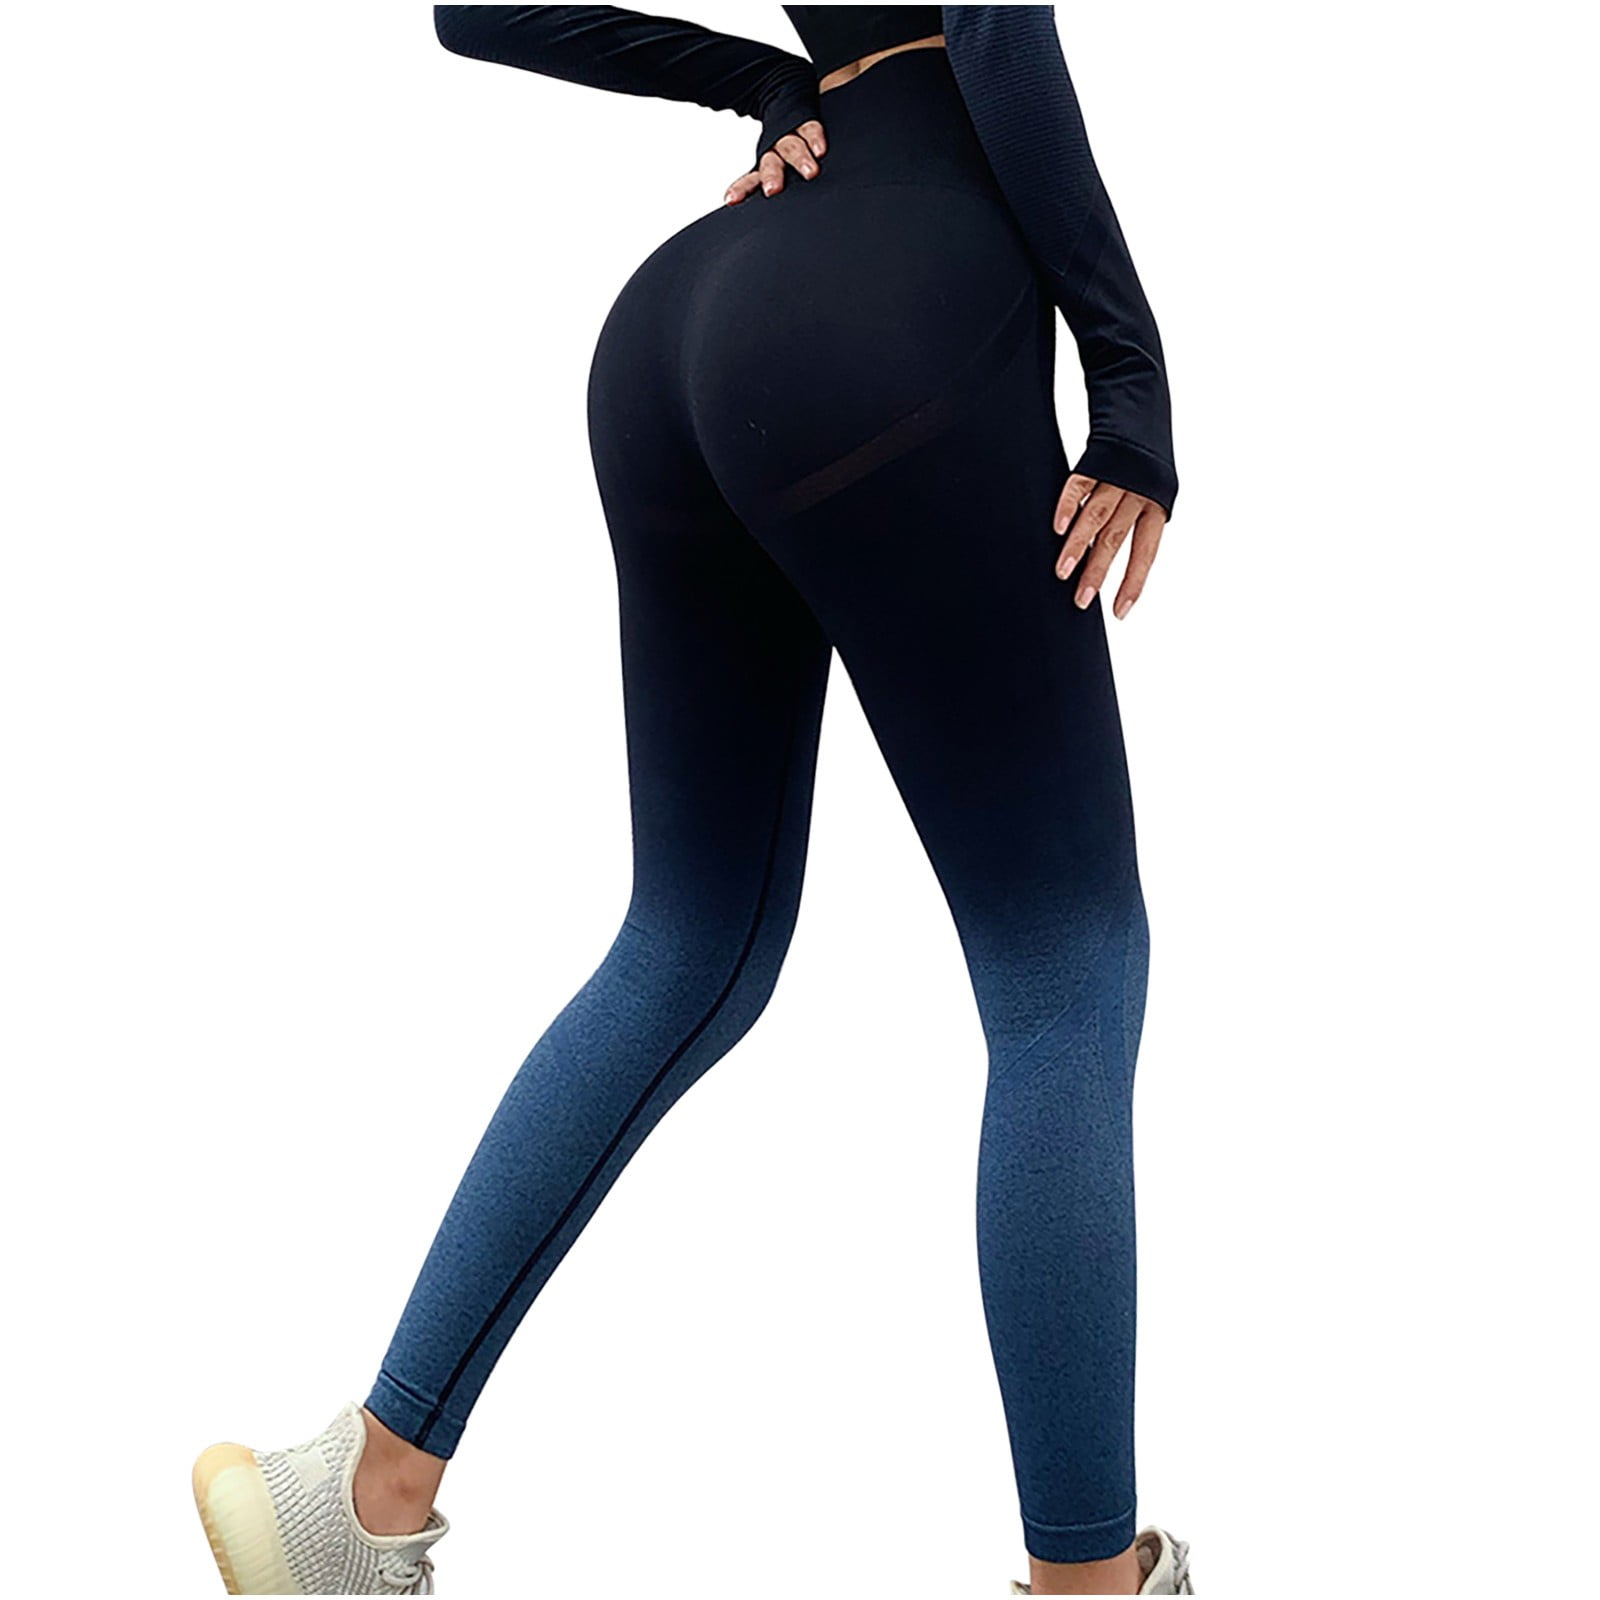 Women's High Waist Yoga Pants Gradient Color Tummy Control Butt Lifting  Stretchy Leggings Gym Workout Capris Exercise Tights 